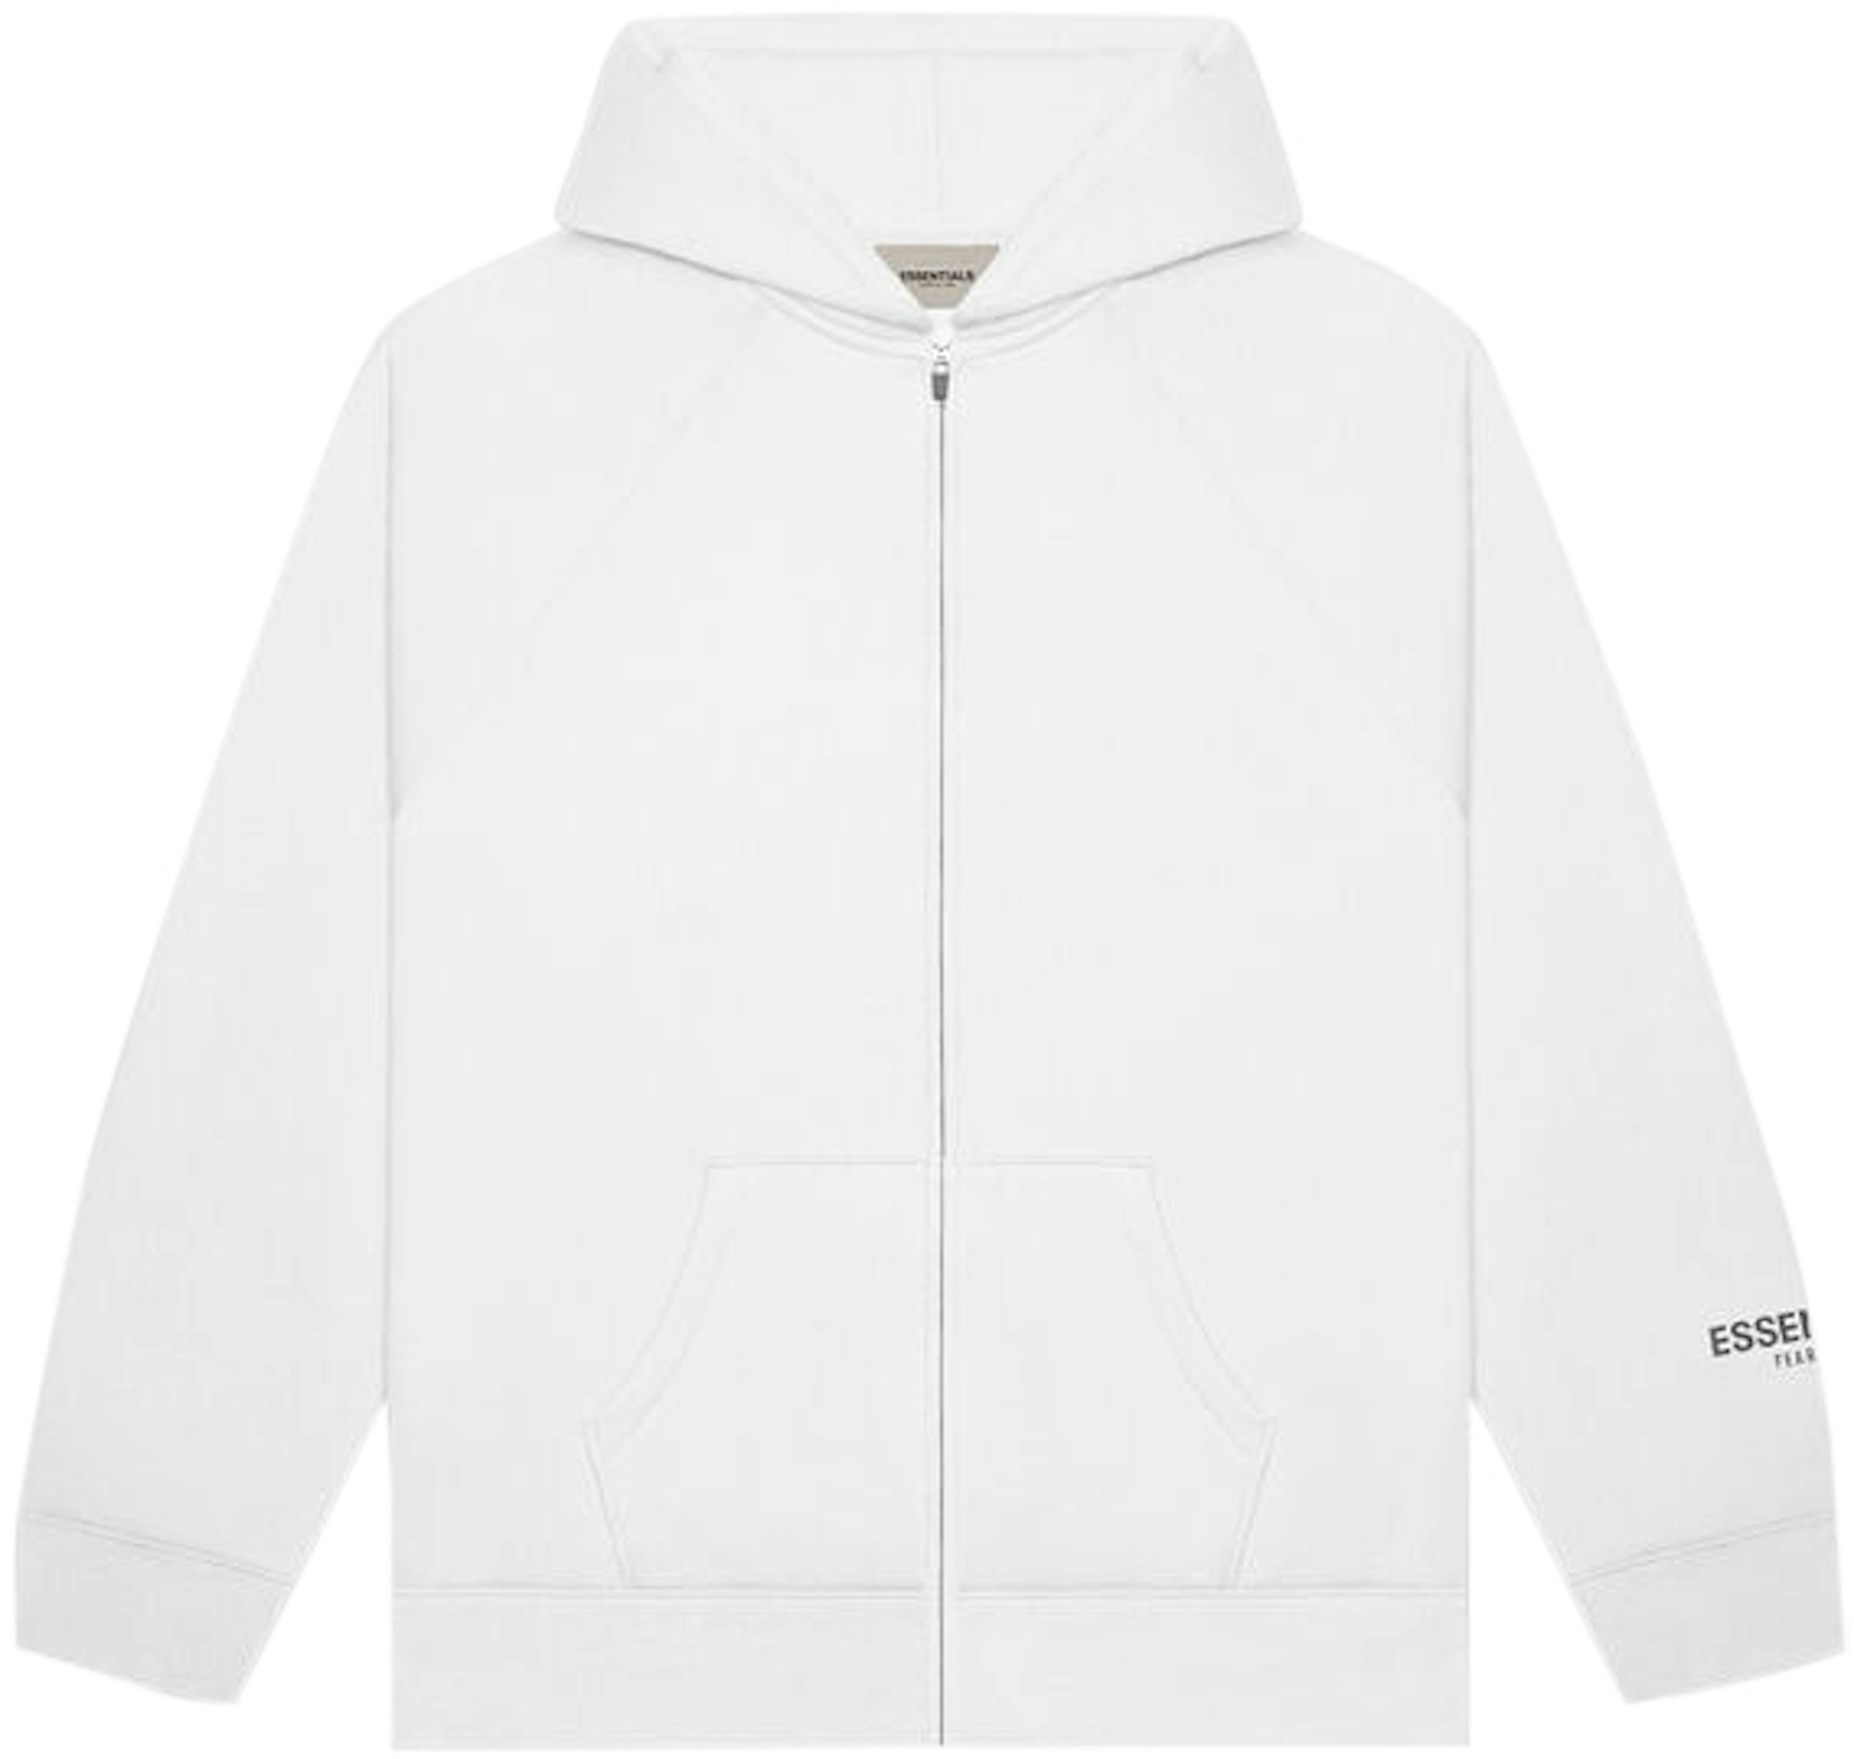 FEAR OF GOD ESSENTIALS 3D Silicon Applique Full Zip Up Hoodie White - SS20